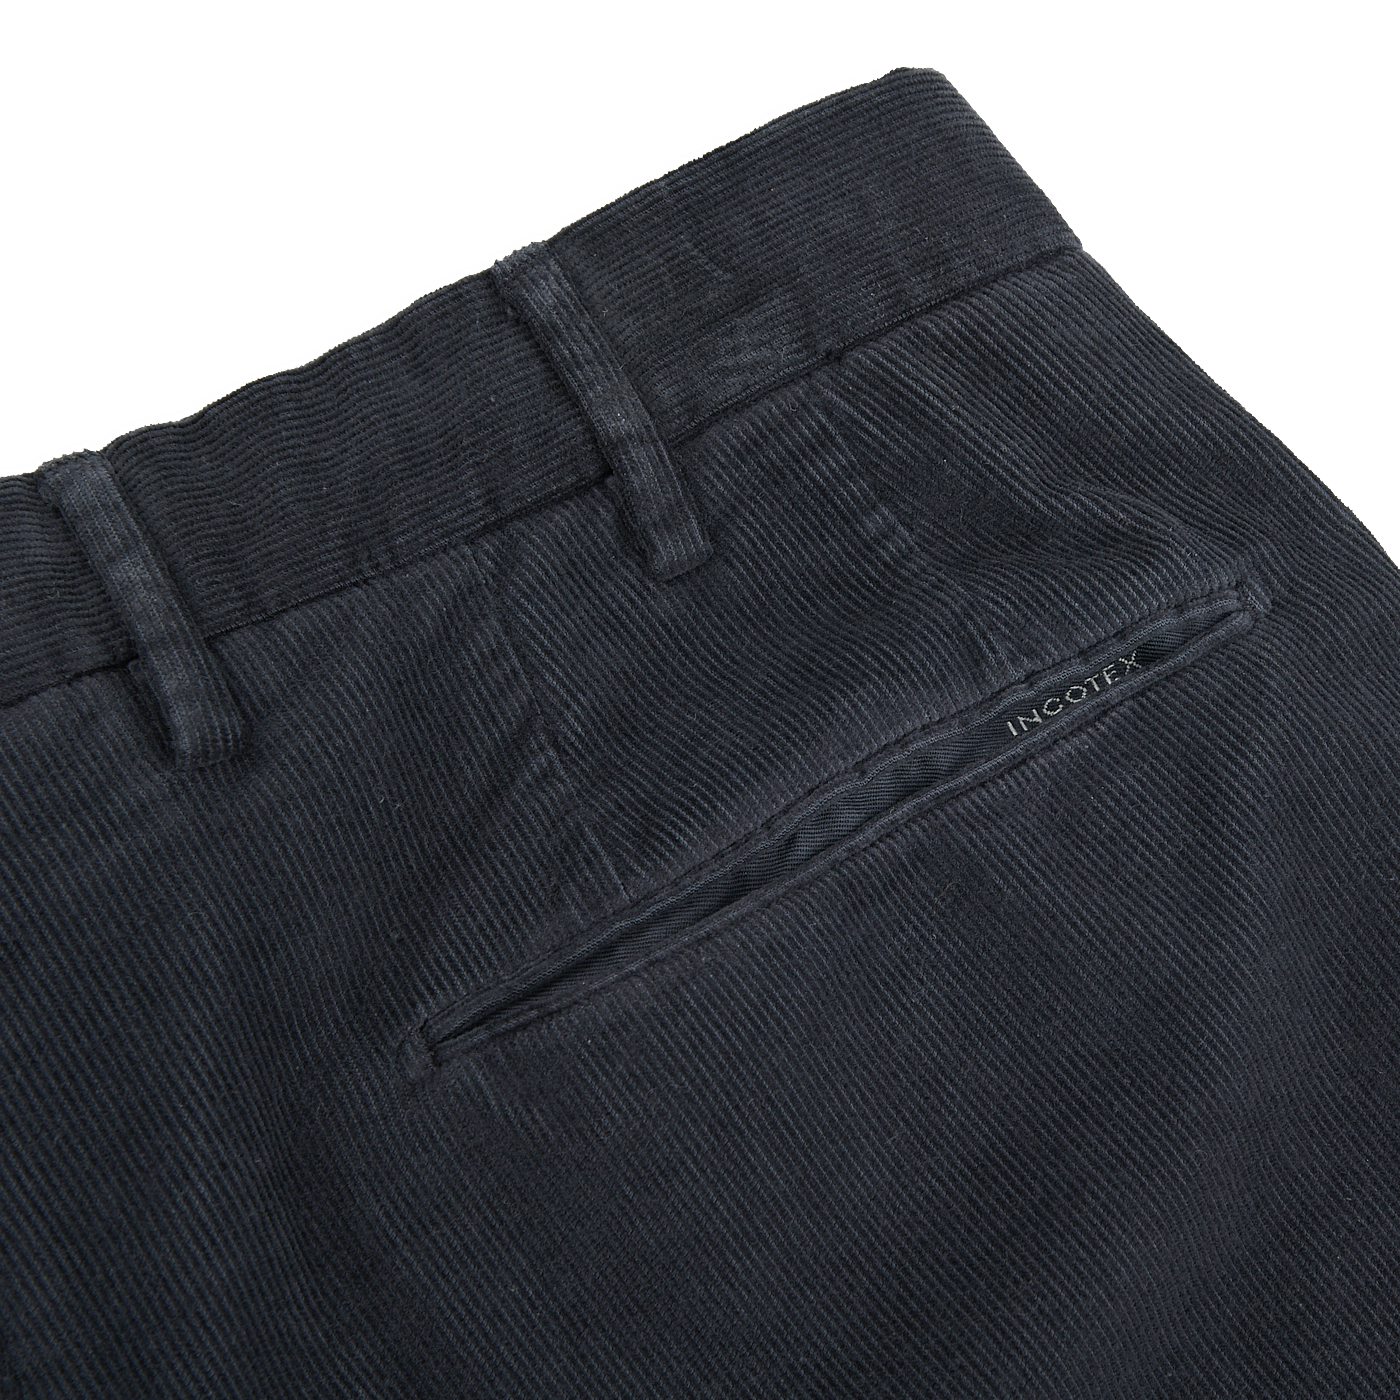 The back pocket of a Grey Micro Cotton Corduroy High Comfort Chinos by Incotex.